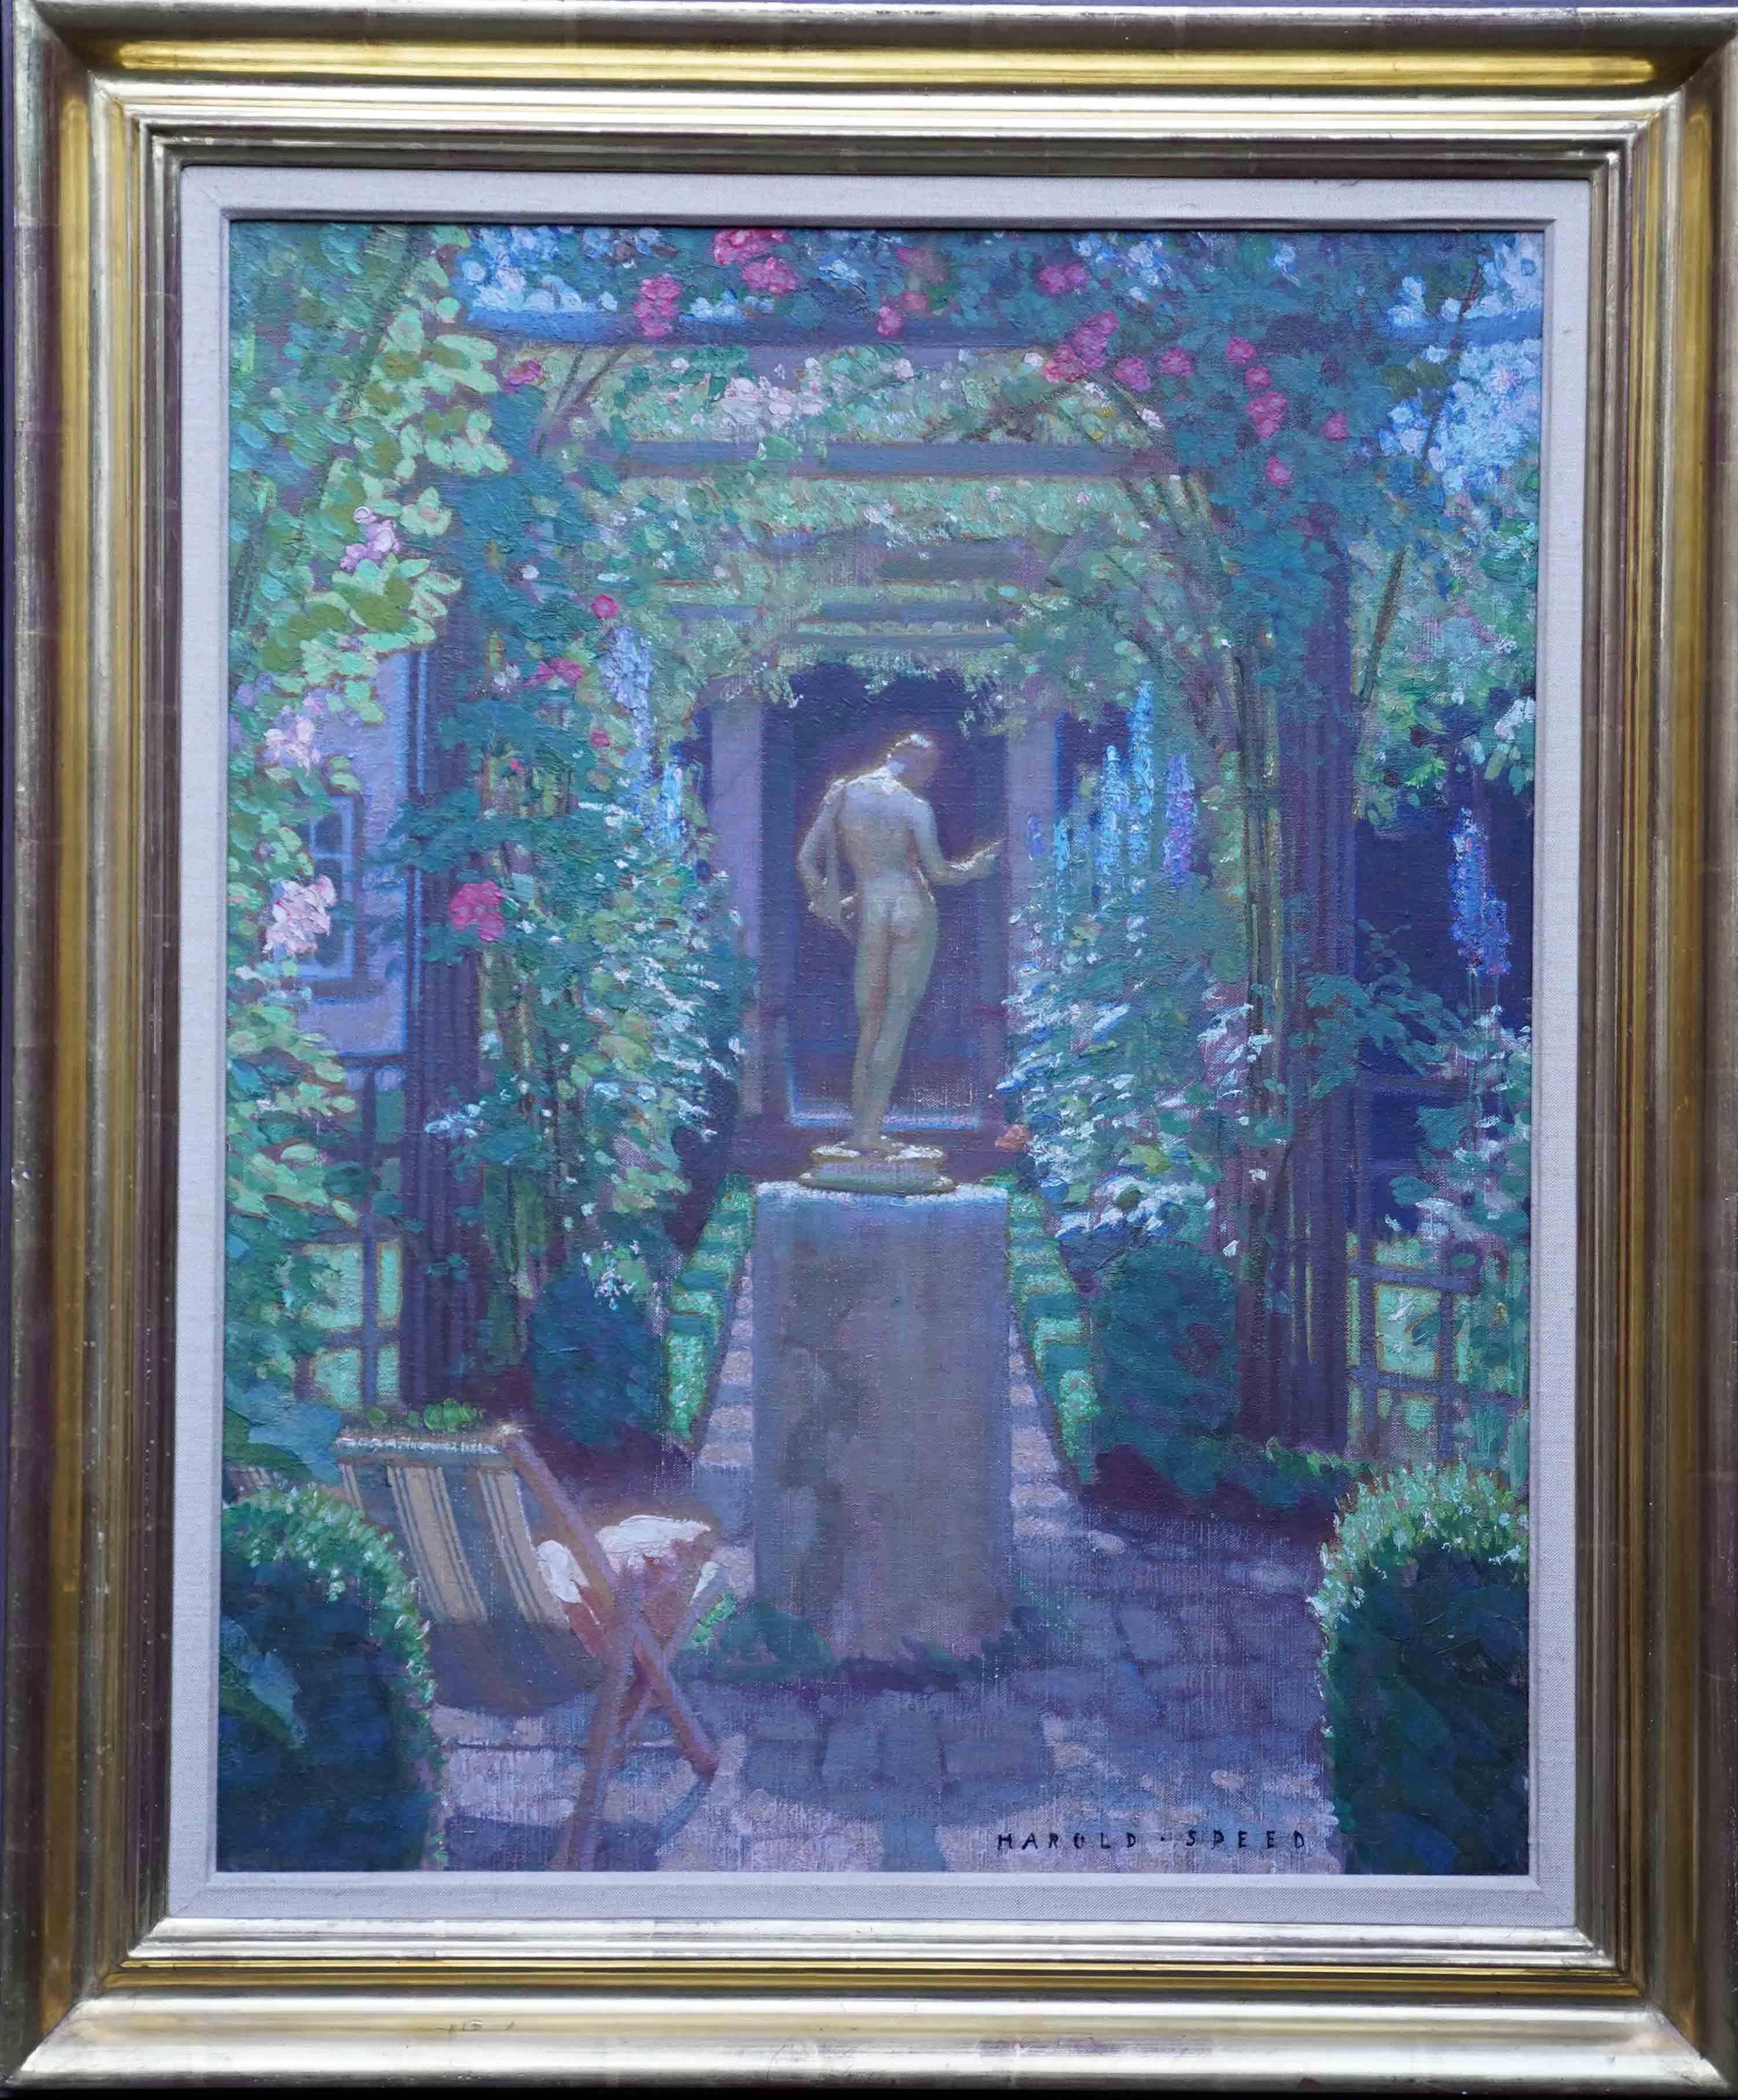 Harold Speed Landscape Painting - Garden with Classical Statue - British 1930's art gardenscape oil painting